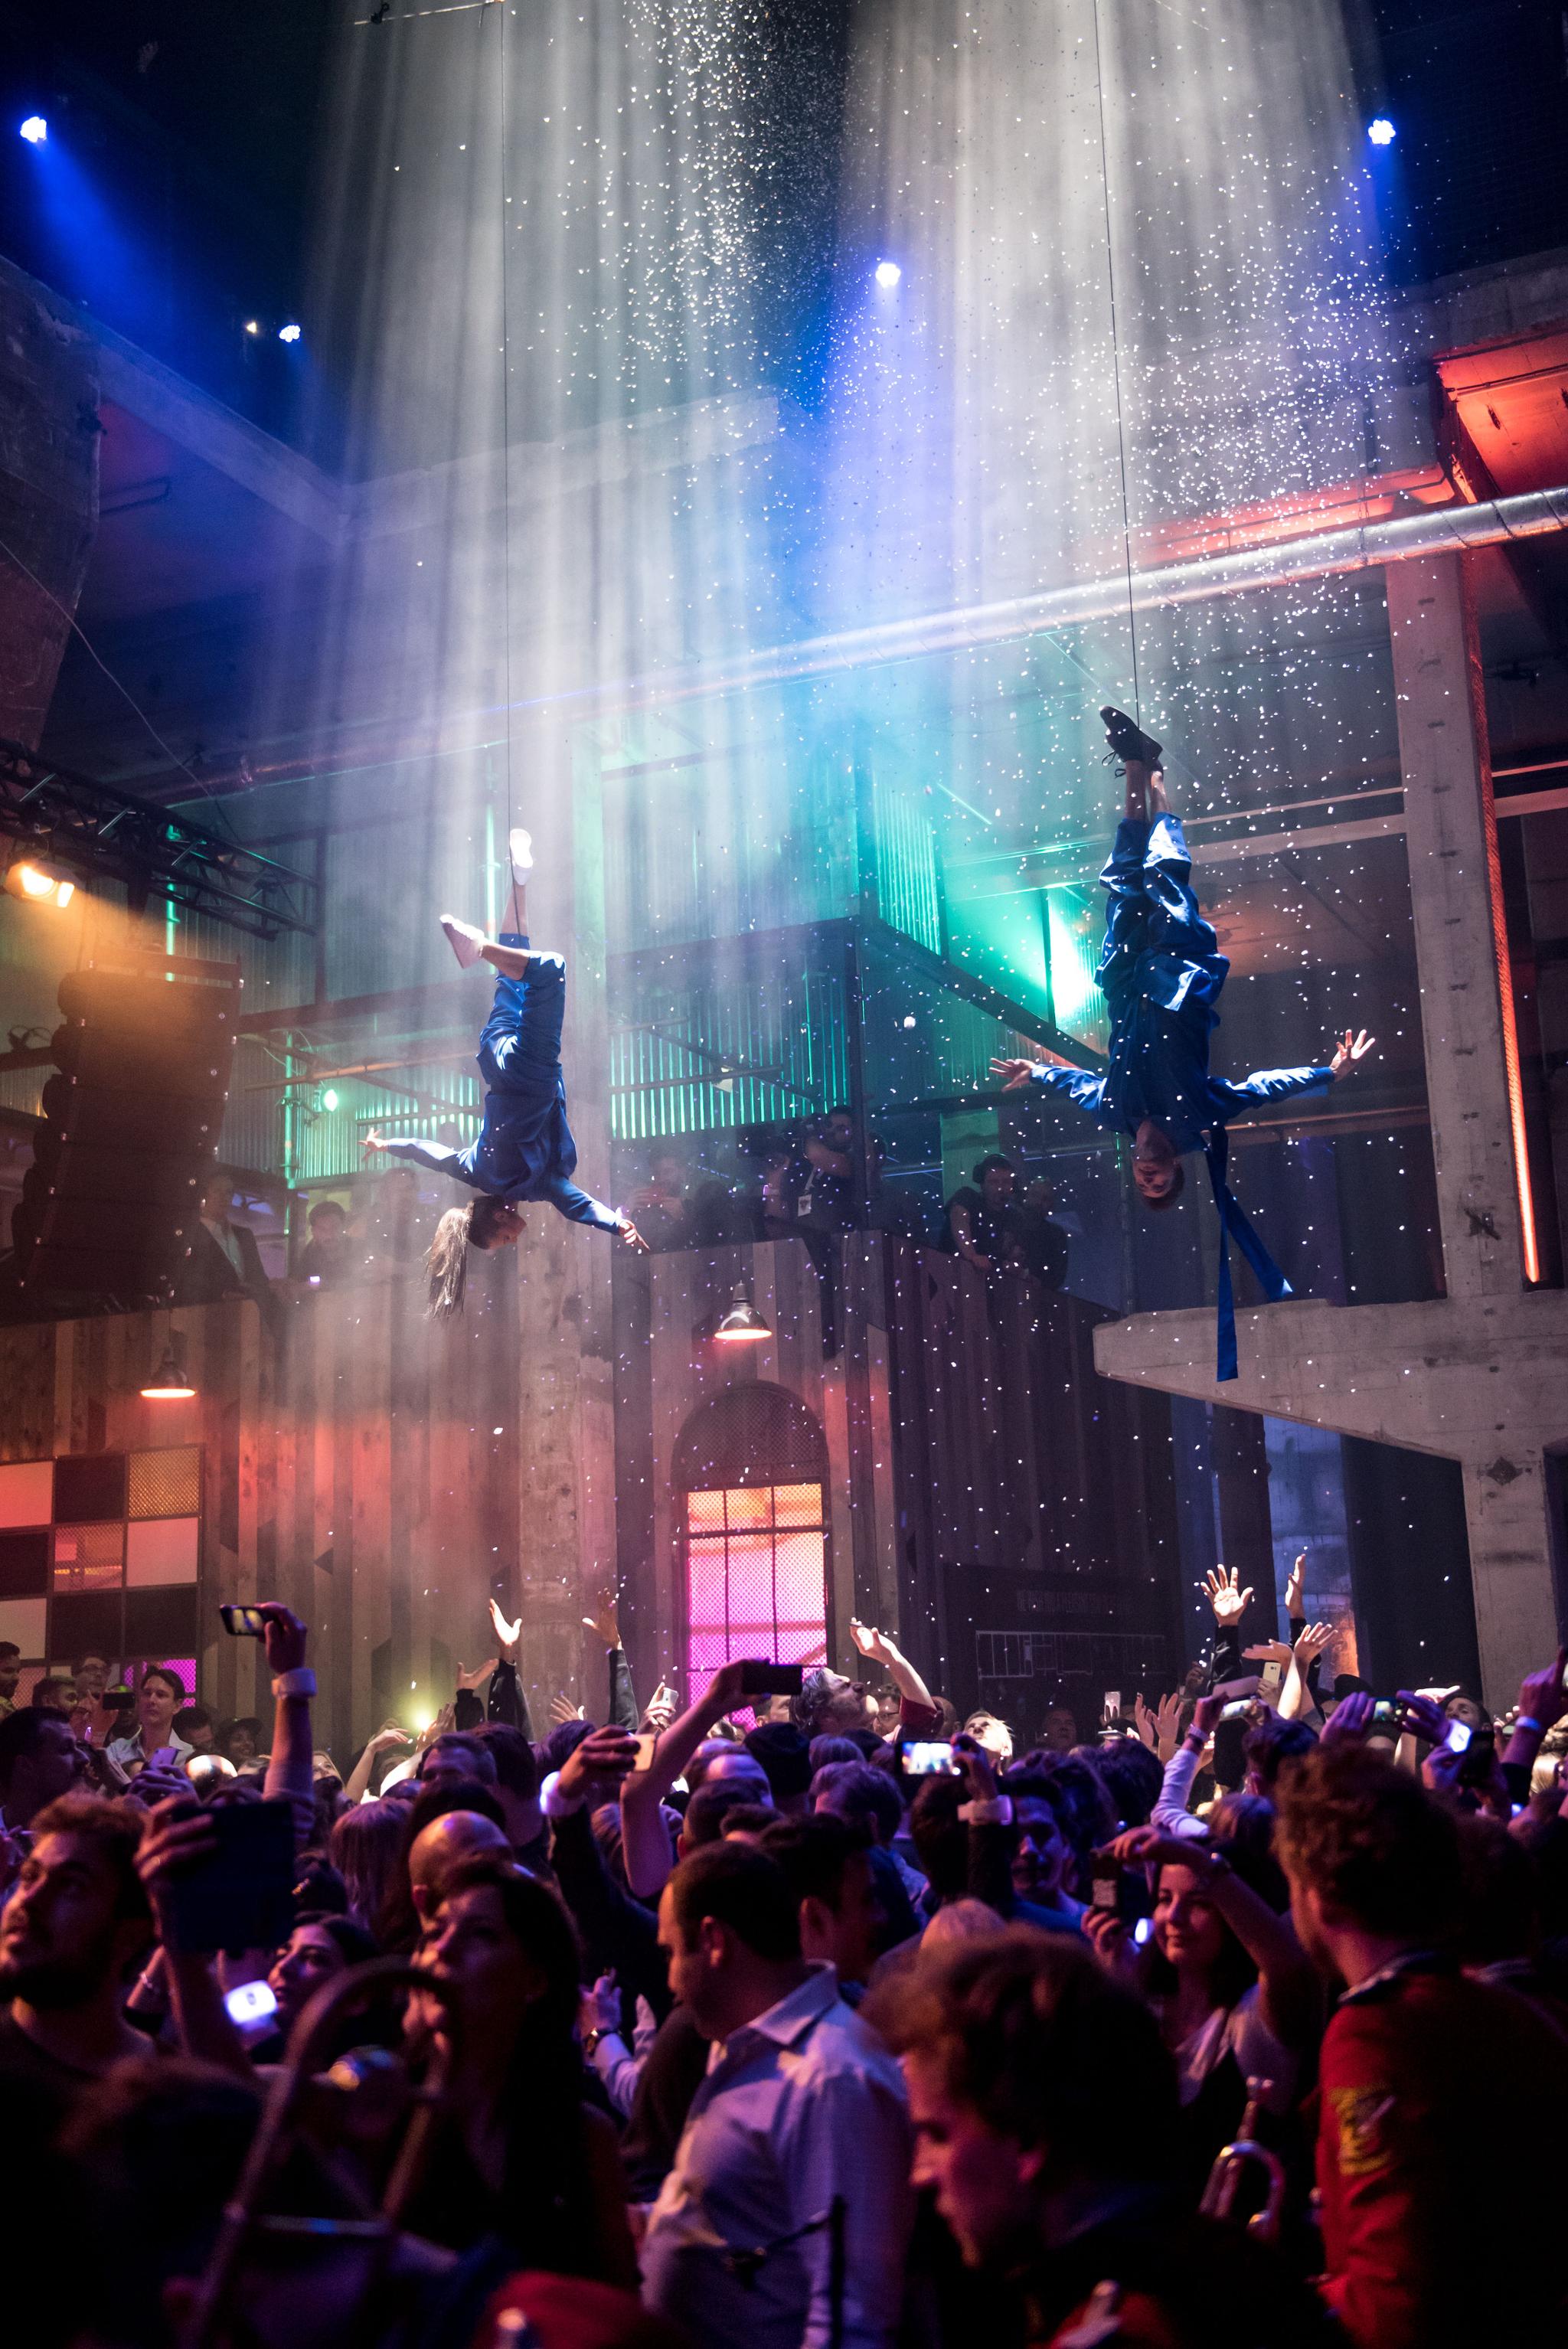 Two acrobats hang upside down from two cables, respectively, bathed in a shower of light and confetti coming from the ceiling. Below them is a lively crowd. We are in a spacious club environment with exposed concrete and high ceilings.